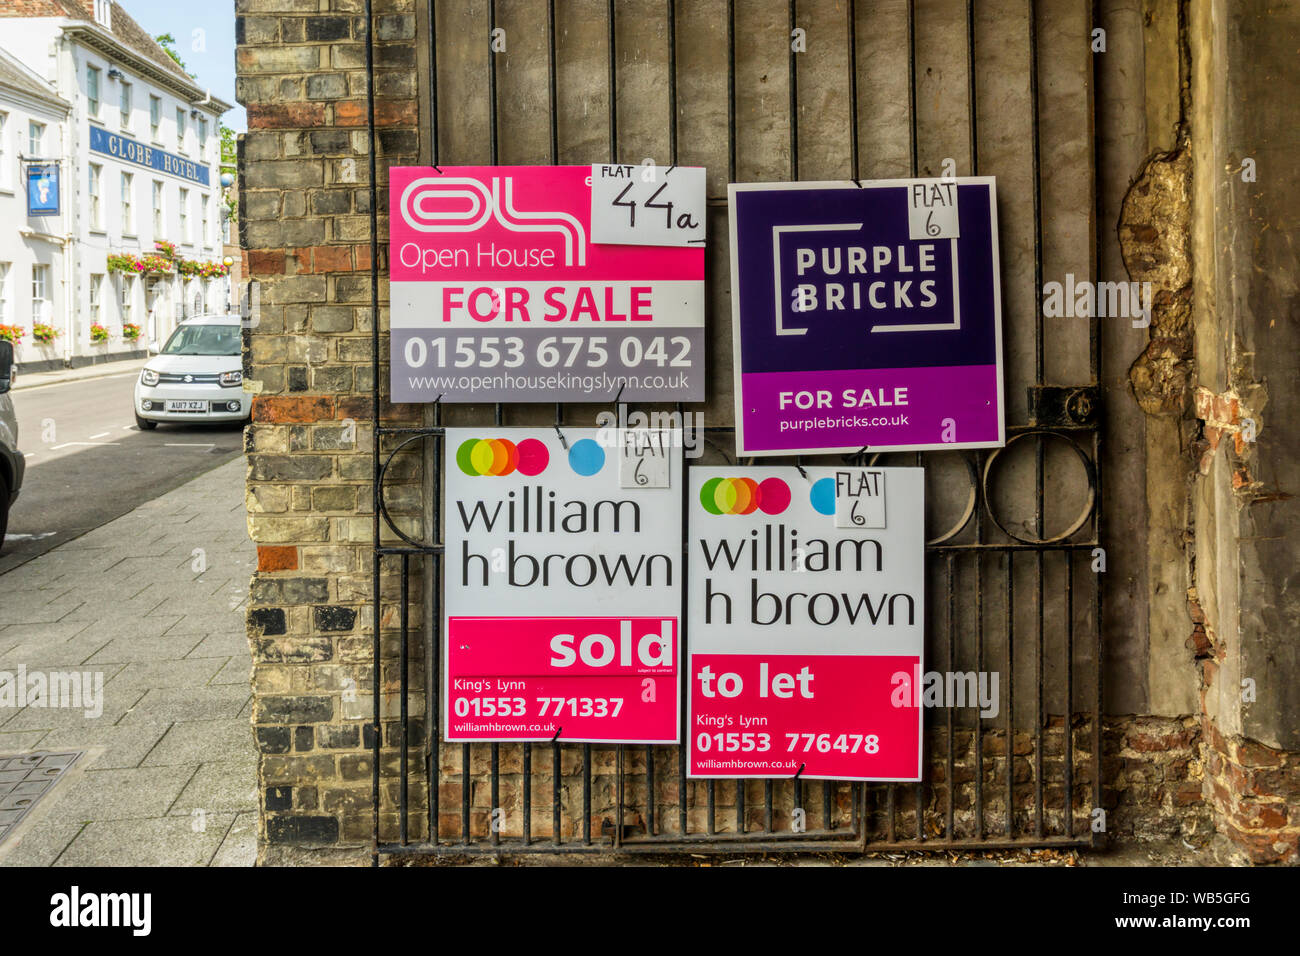 Estate Agent's boards for flats for sale in King's Lynn, Norfolk. Stock Photo